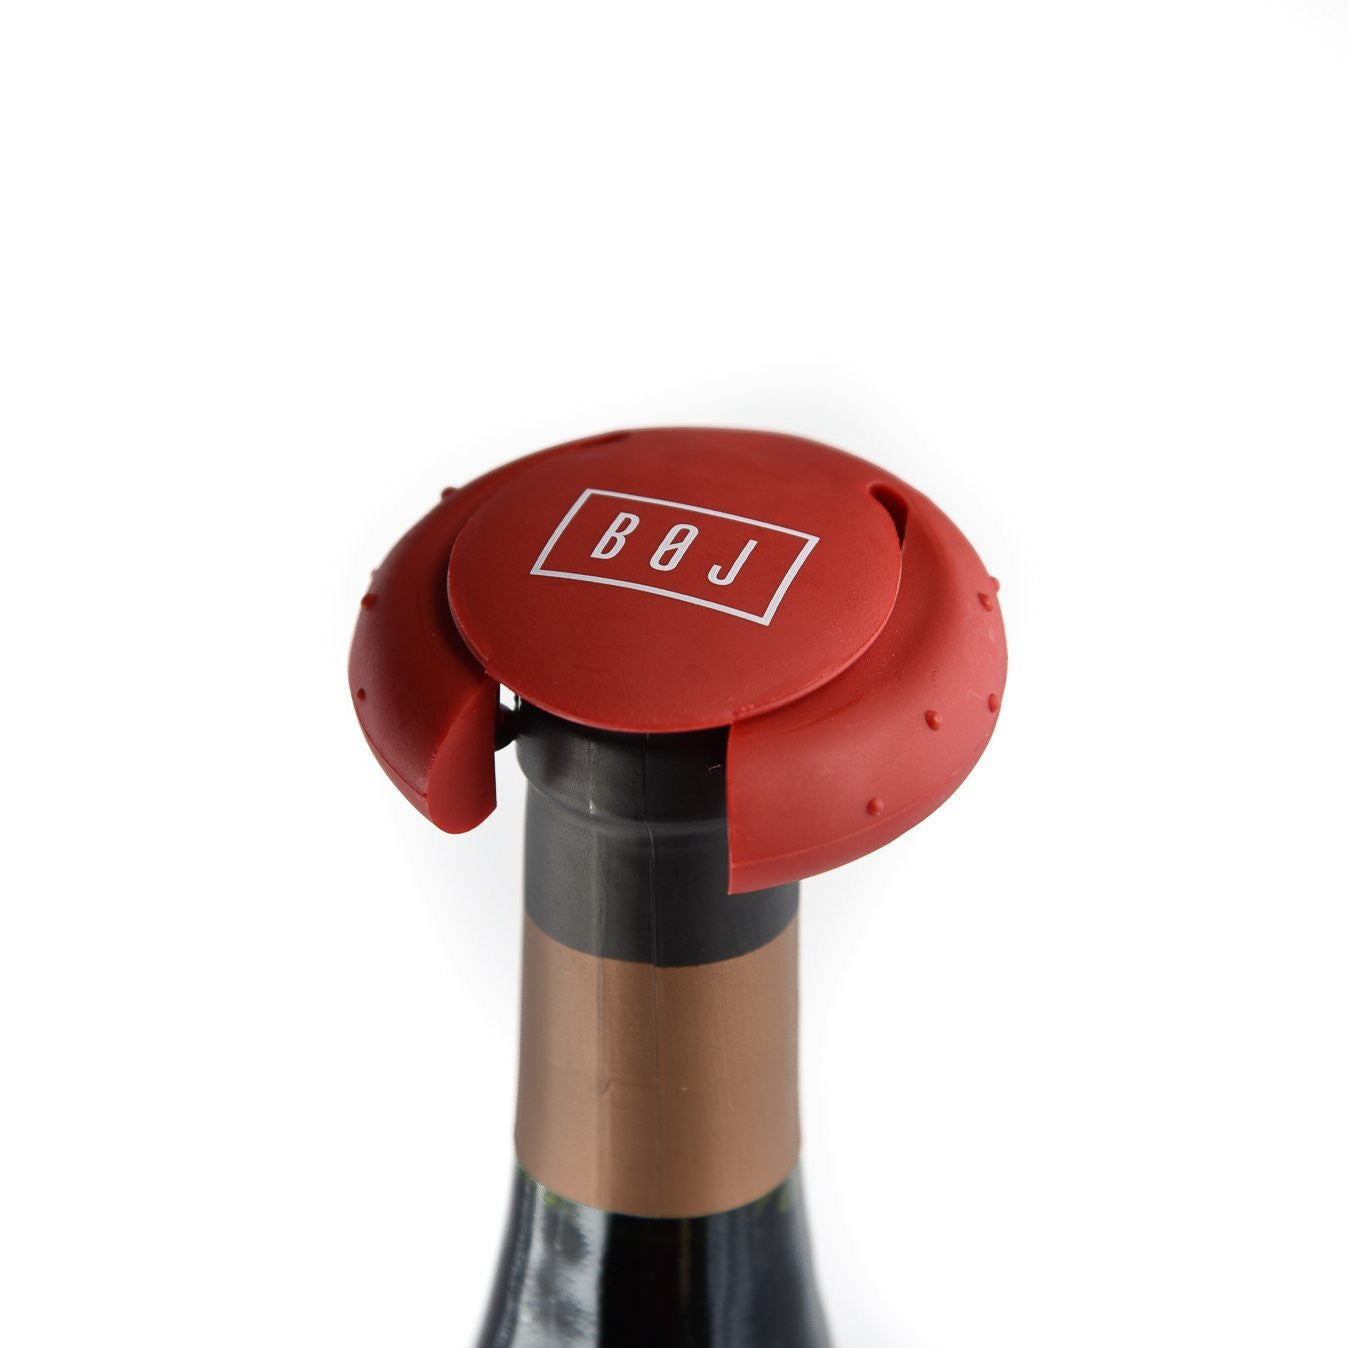 Cap Cut Foil Cutter (Red) with Holder Made of Natural Cork Packaging - wineopeners.shop